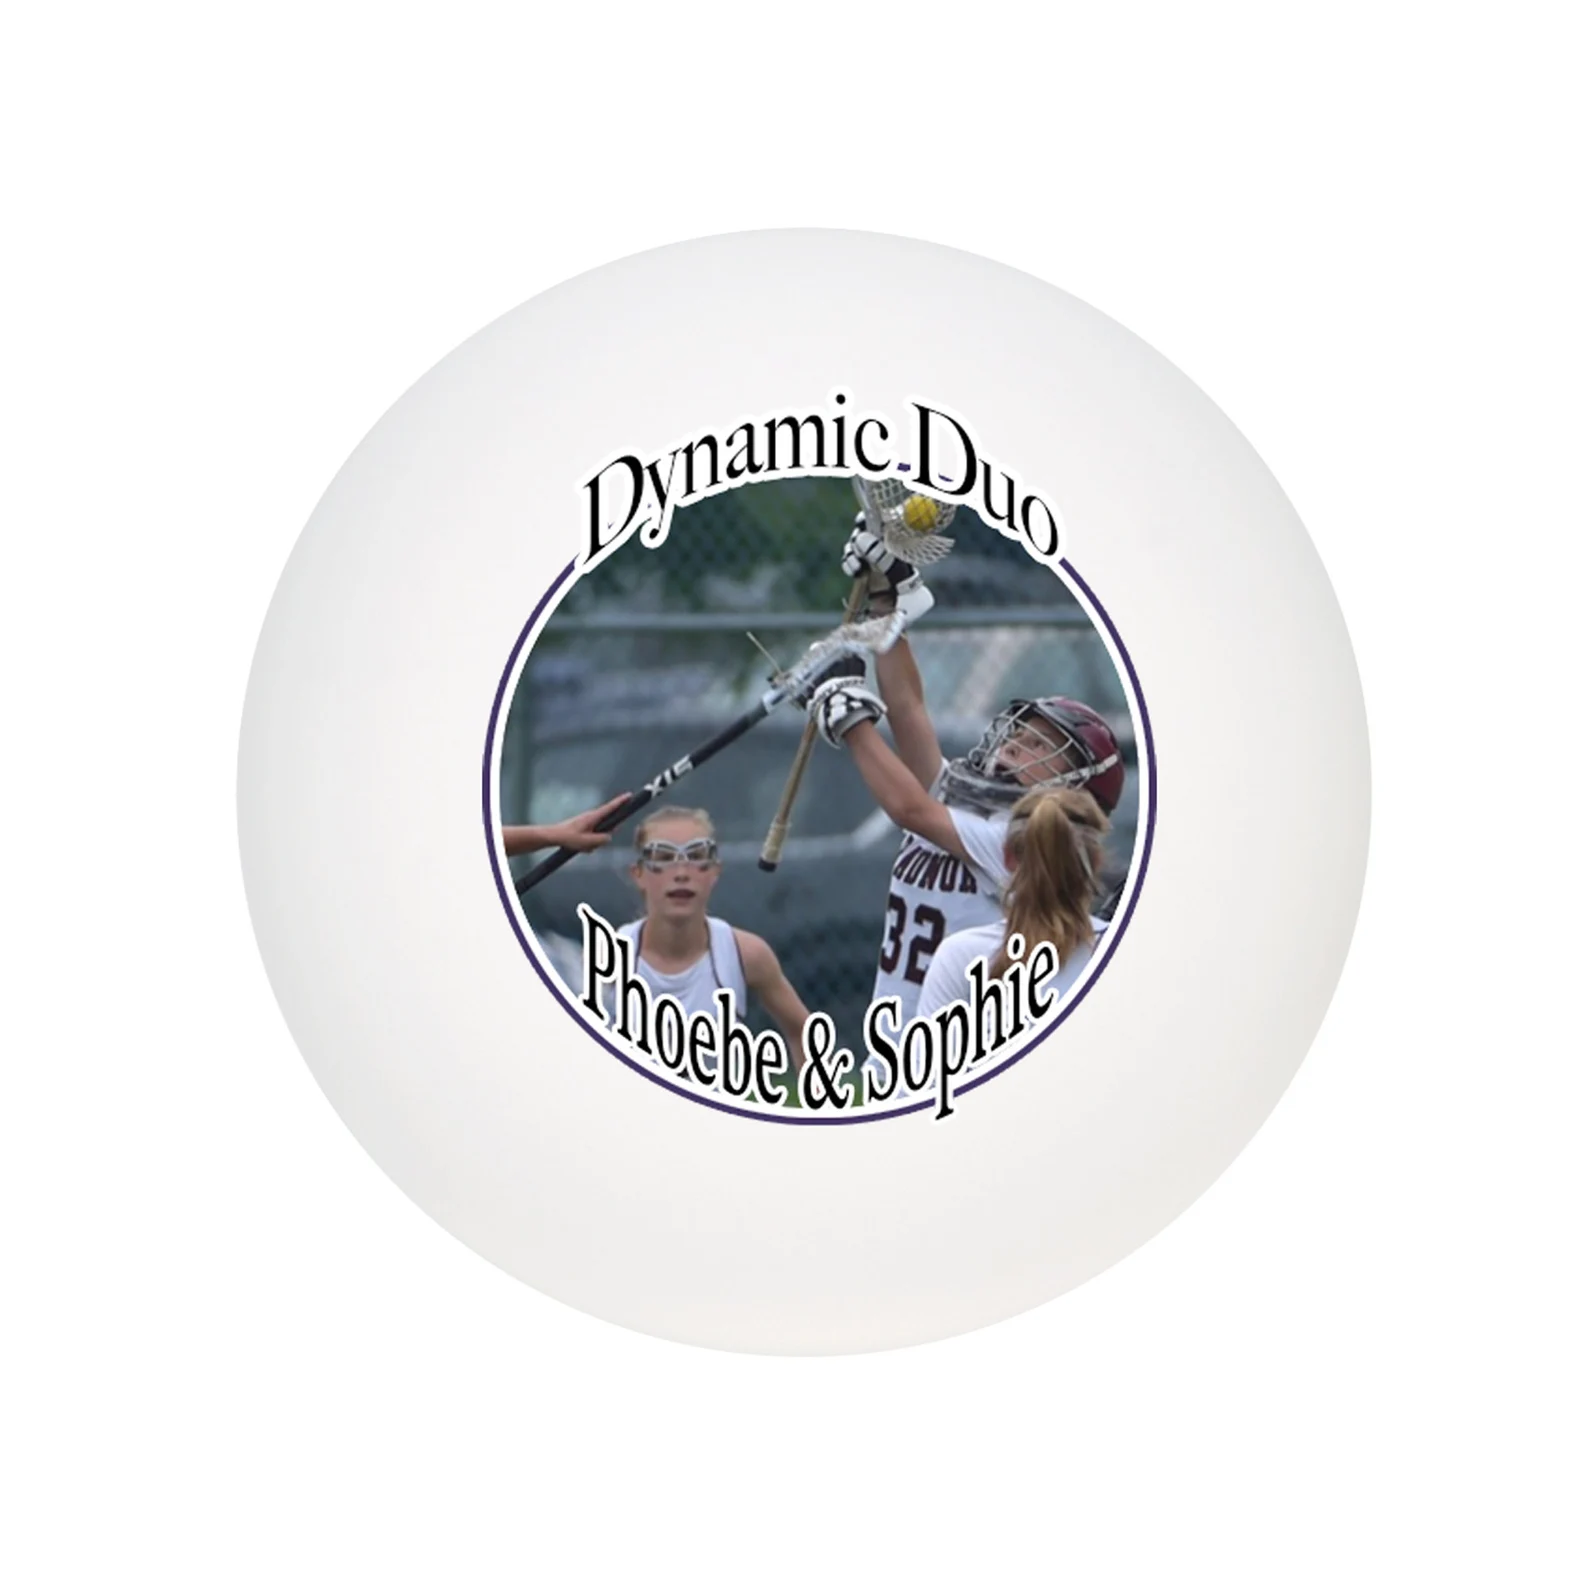 You can't go wrong with a custom lacrosse ball.